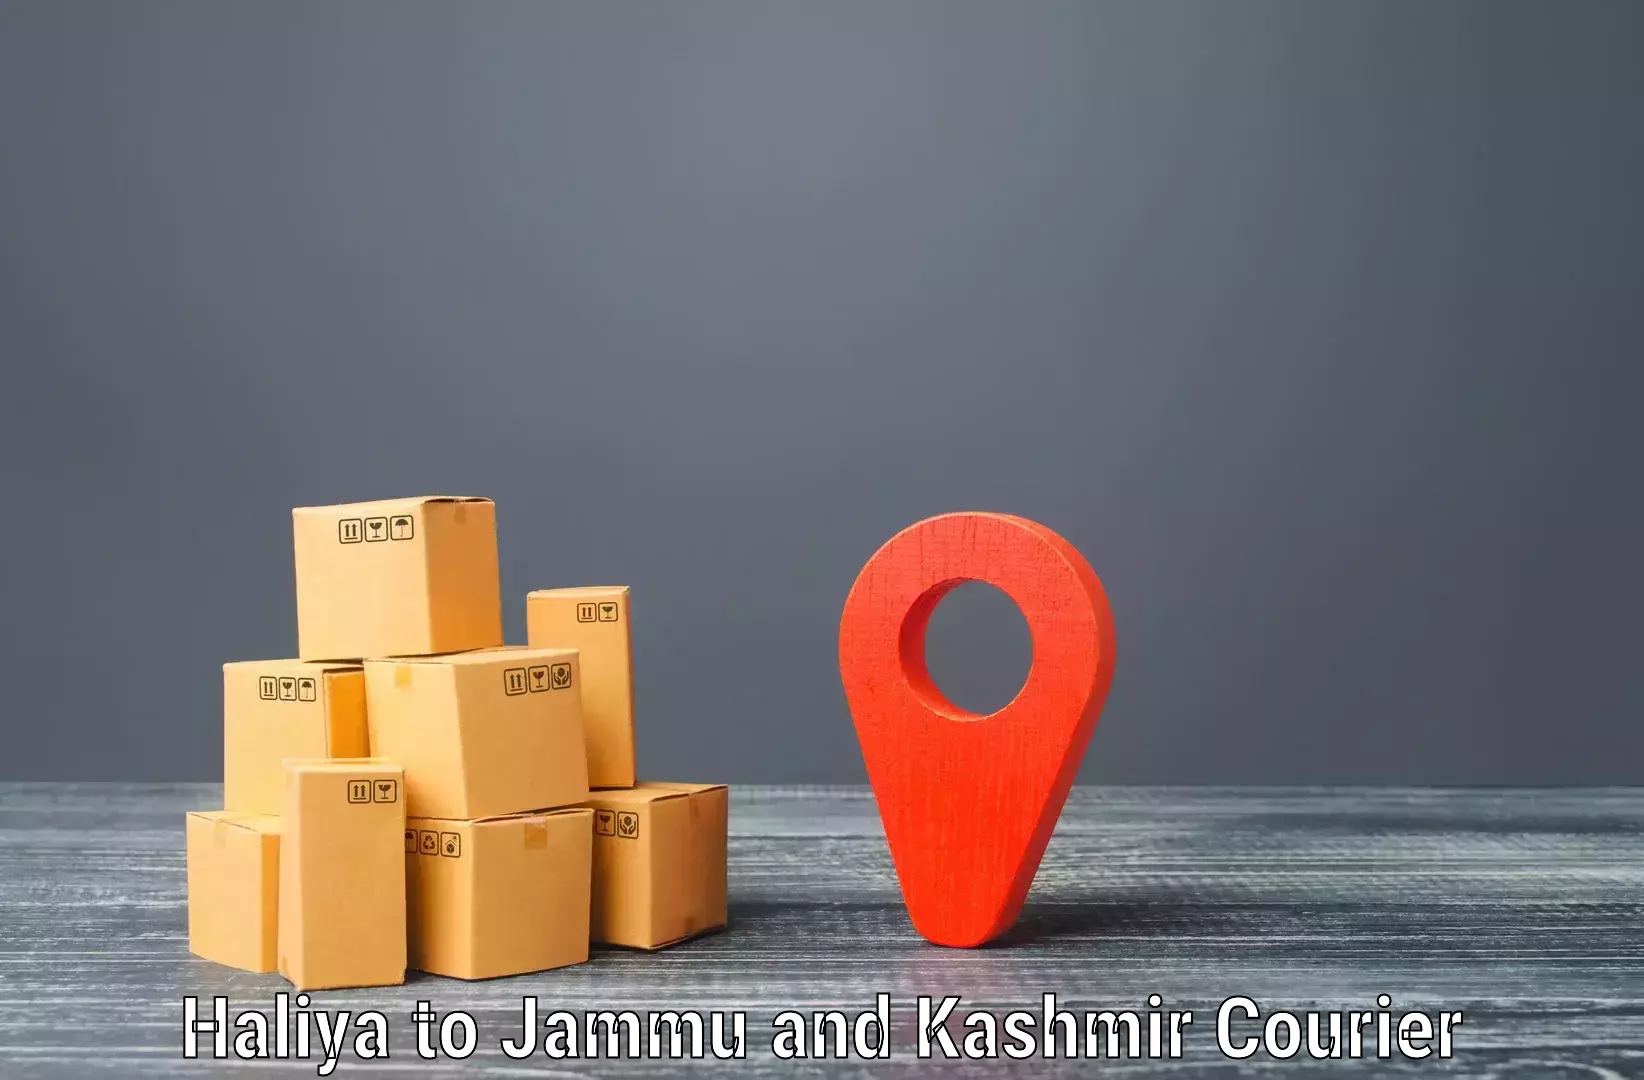 Full-service courier options Haliya to Pulwama